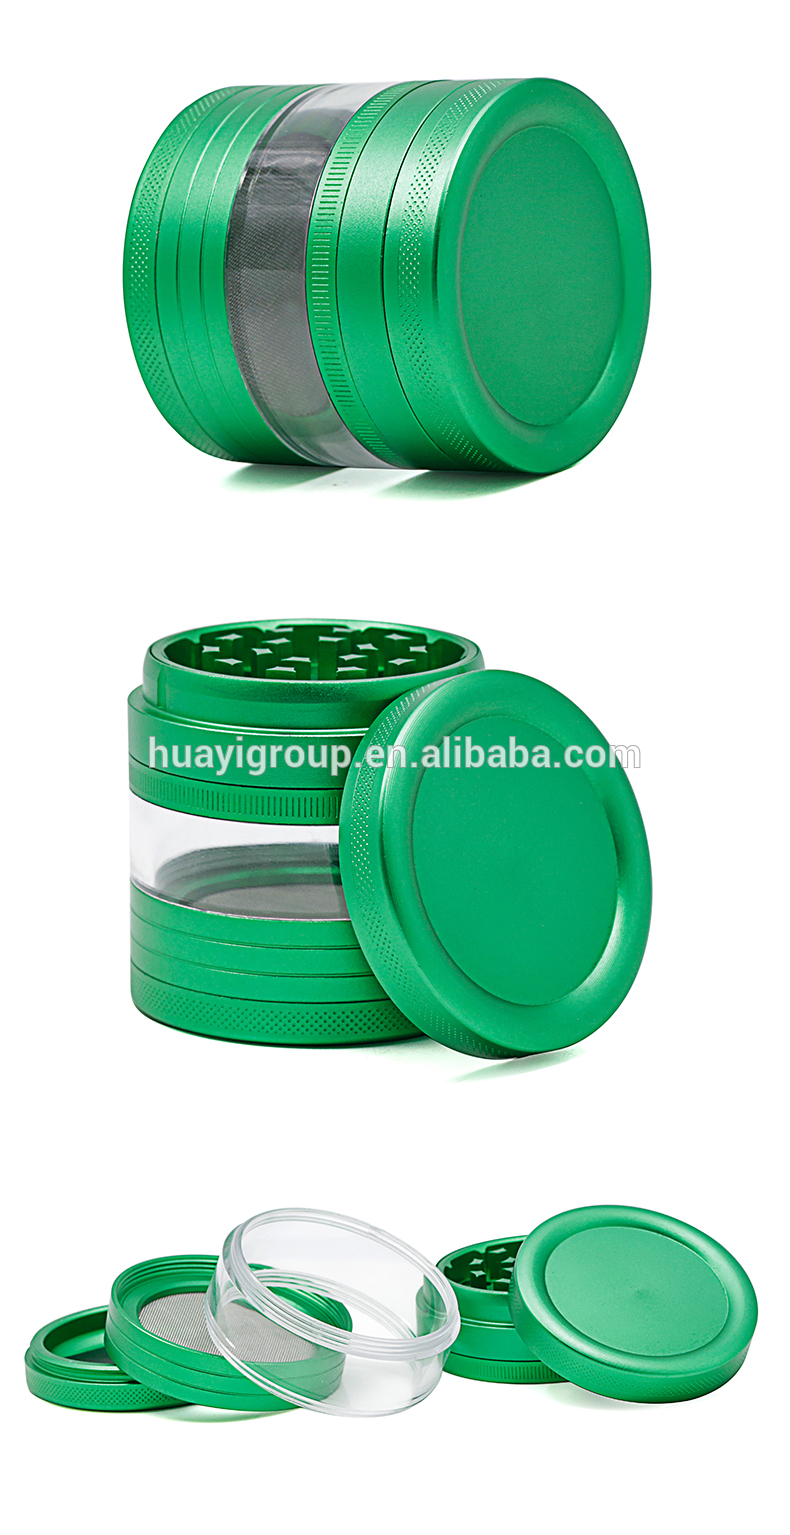 Hot selling 4 layer herb grinder Aluminum weed herb grinder with transparent acry layer custom logo smoking weed grinder